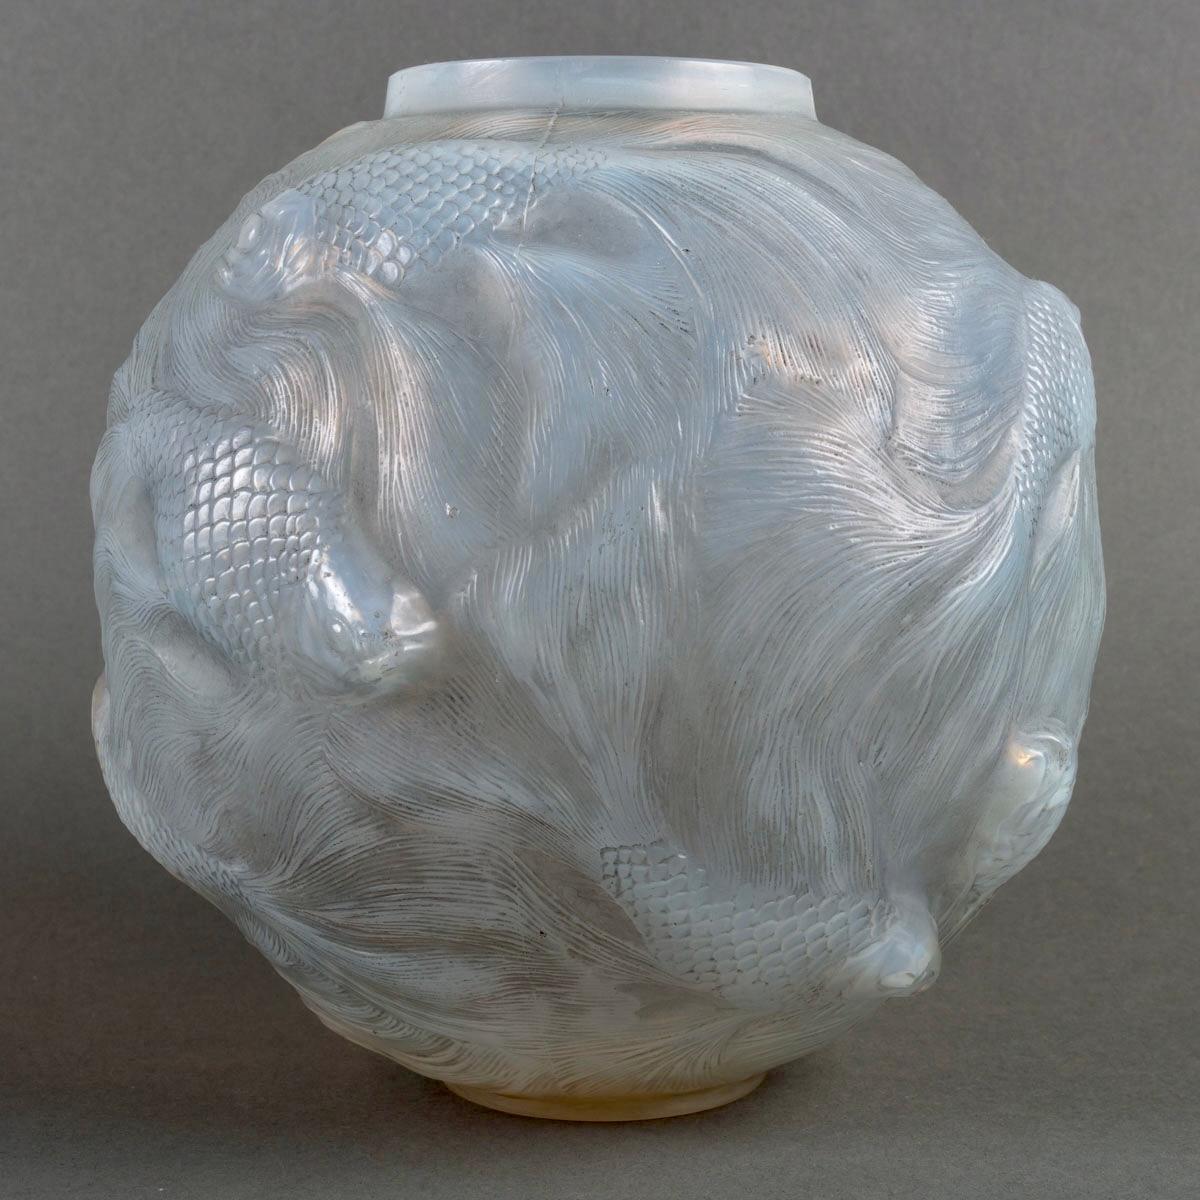 Art Deco 1924 Rene Lalique, Vase Formose Cased Opalescent Glass with Grey Patina